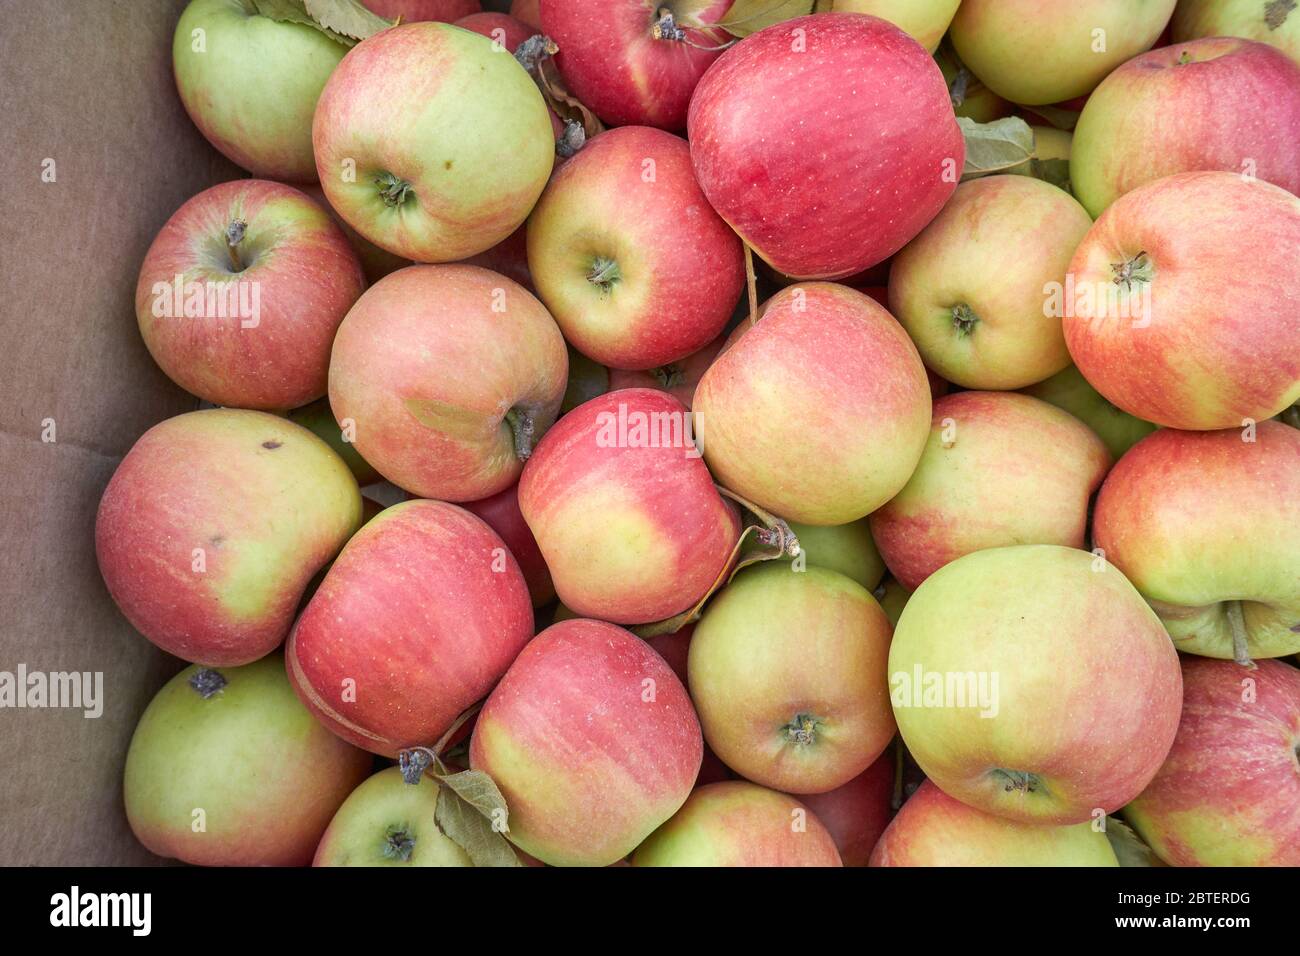 Red apples in a cardboard box in the store Stock Photo